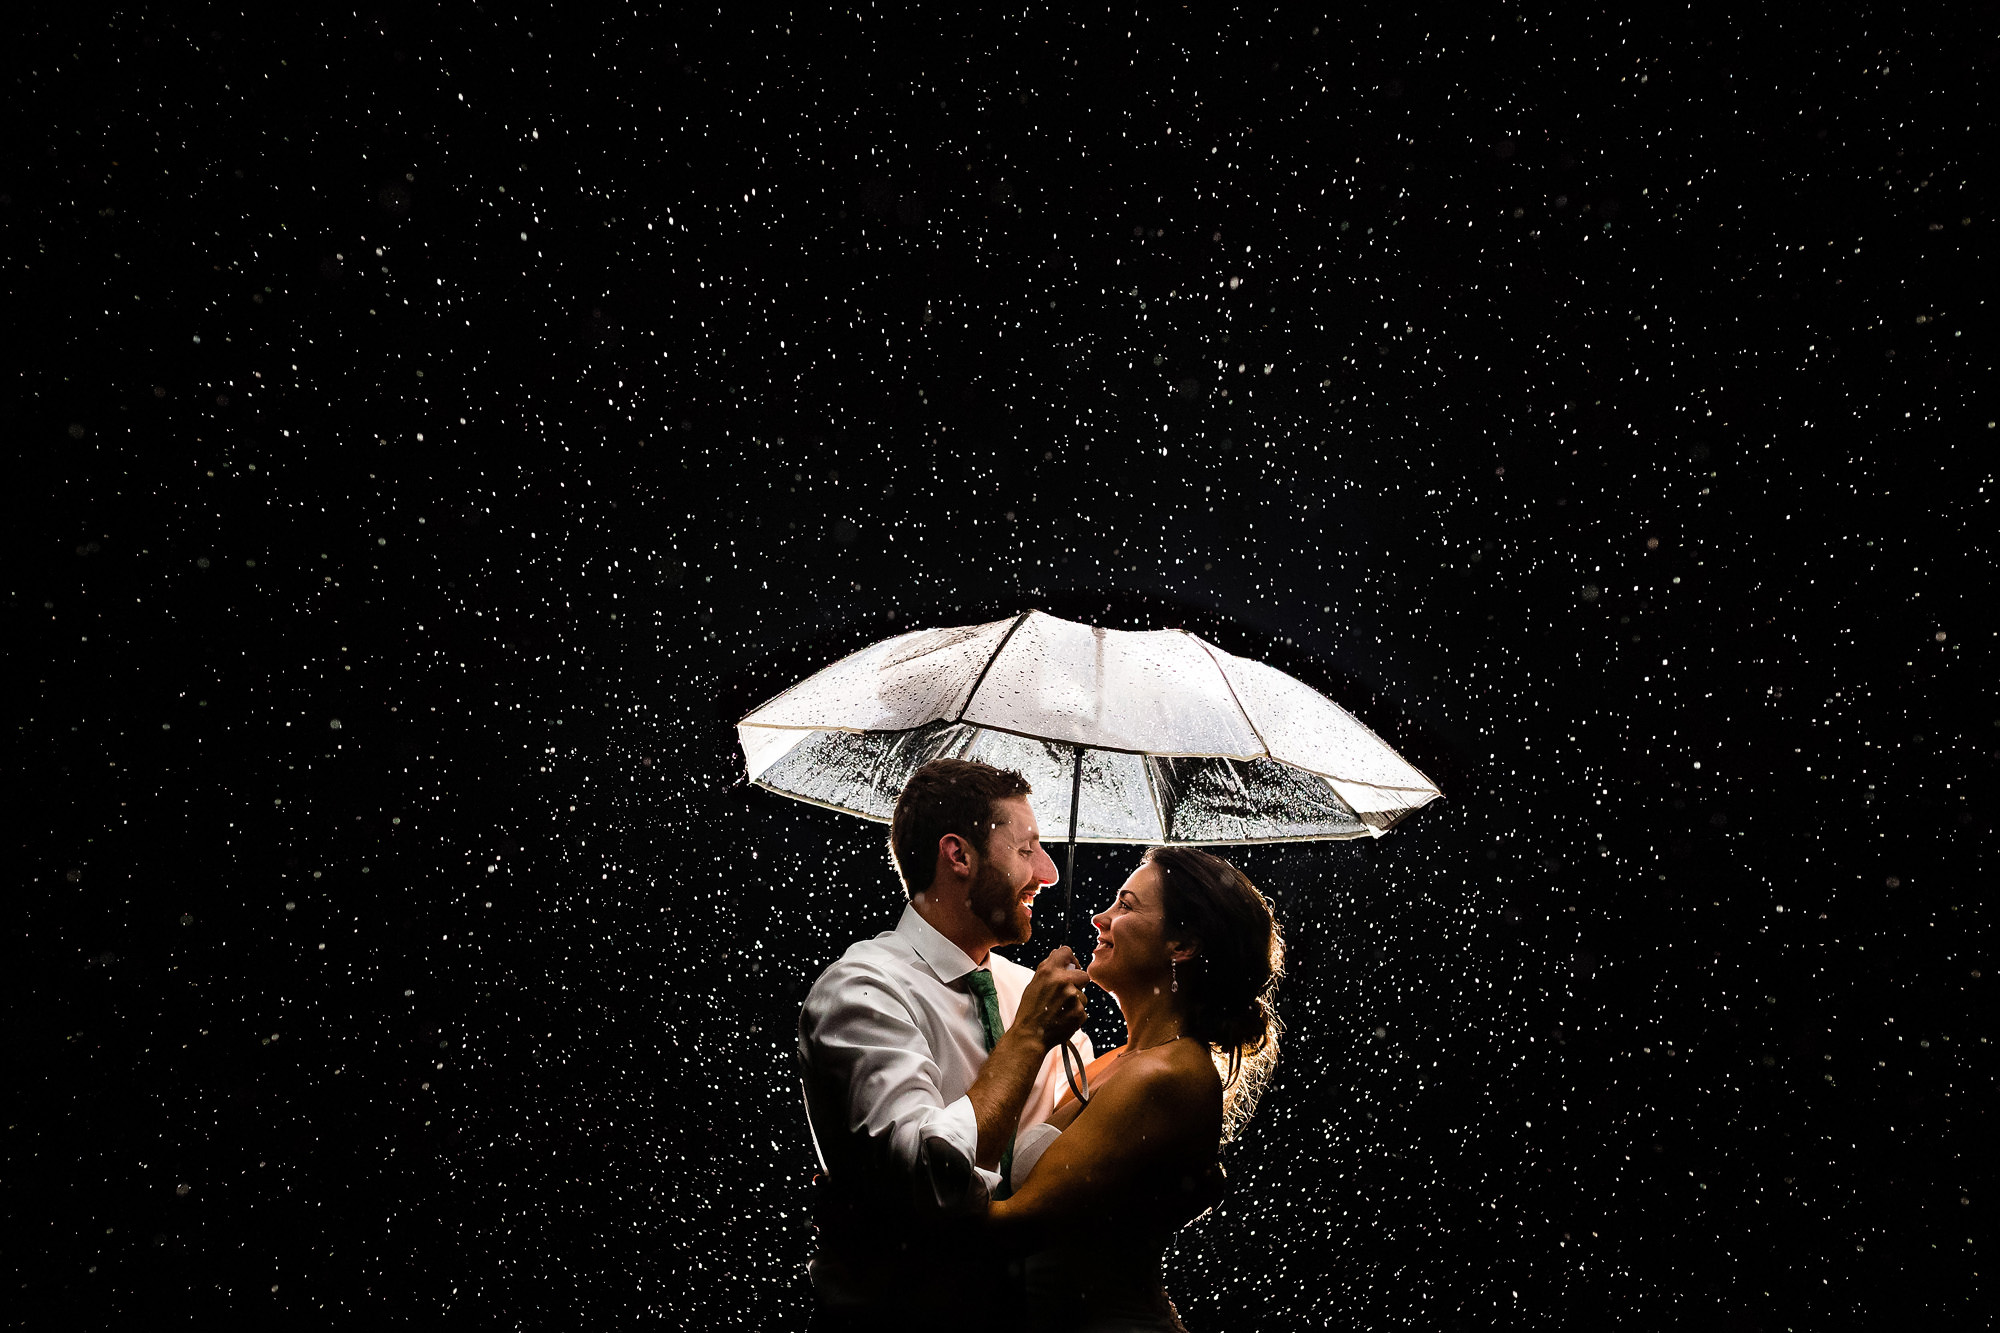 A backlit wedding portrait taken at night while it is raining.